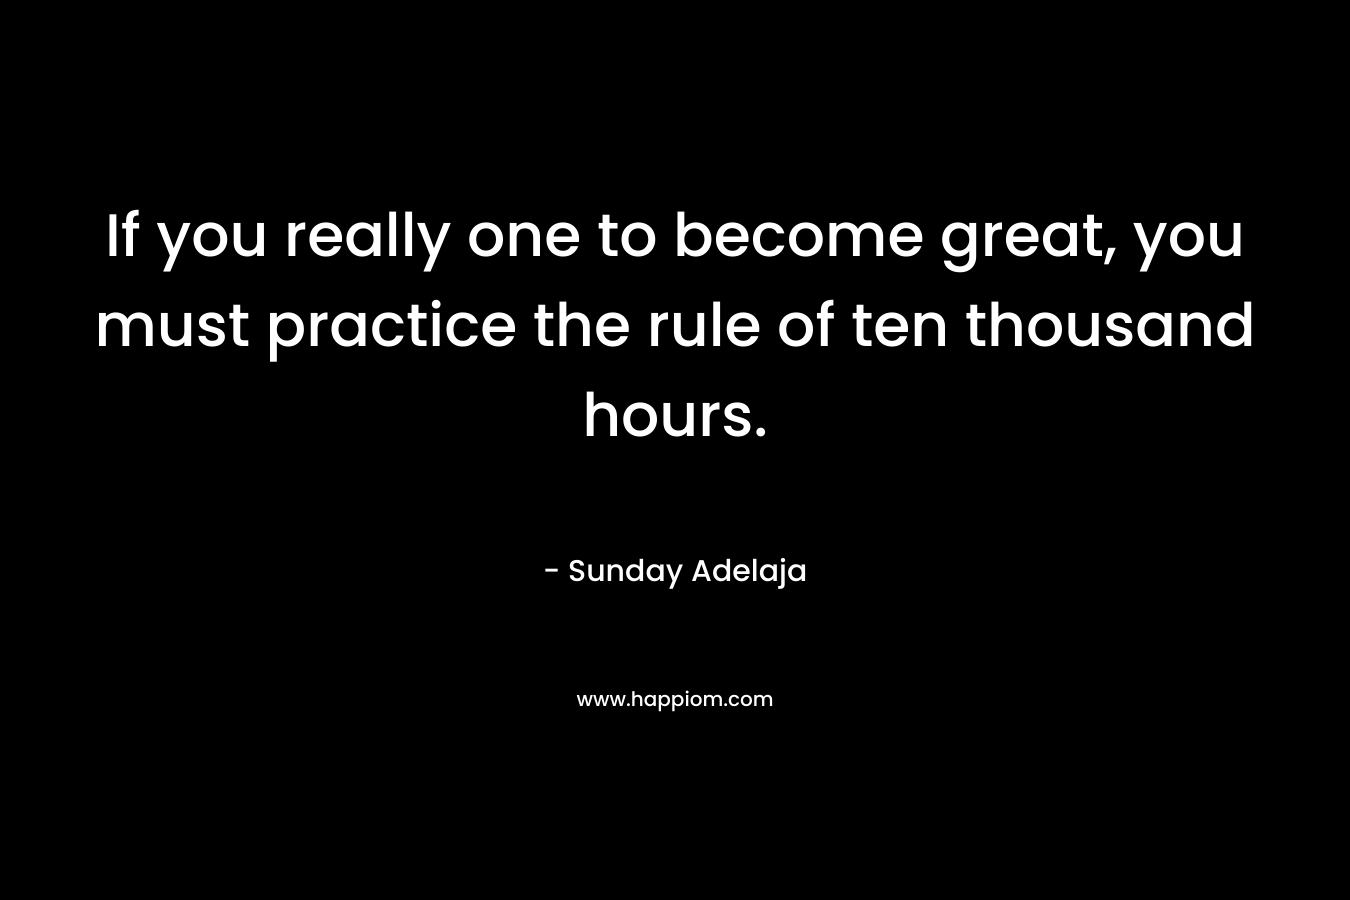 If you really one to become great, you must practice the rule of ten thousand hours.